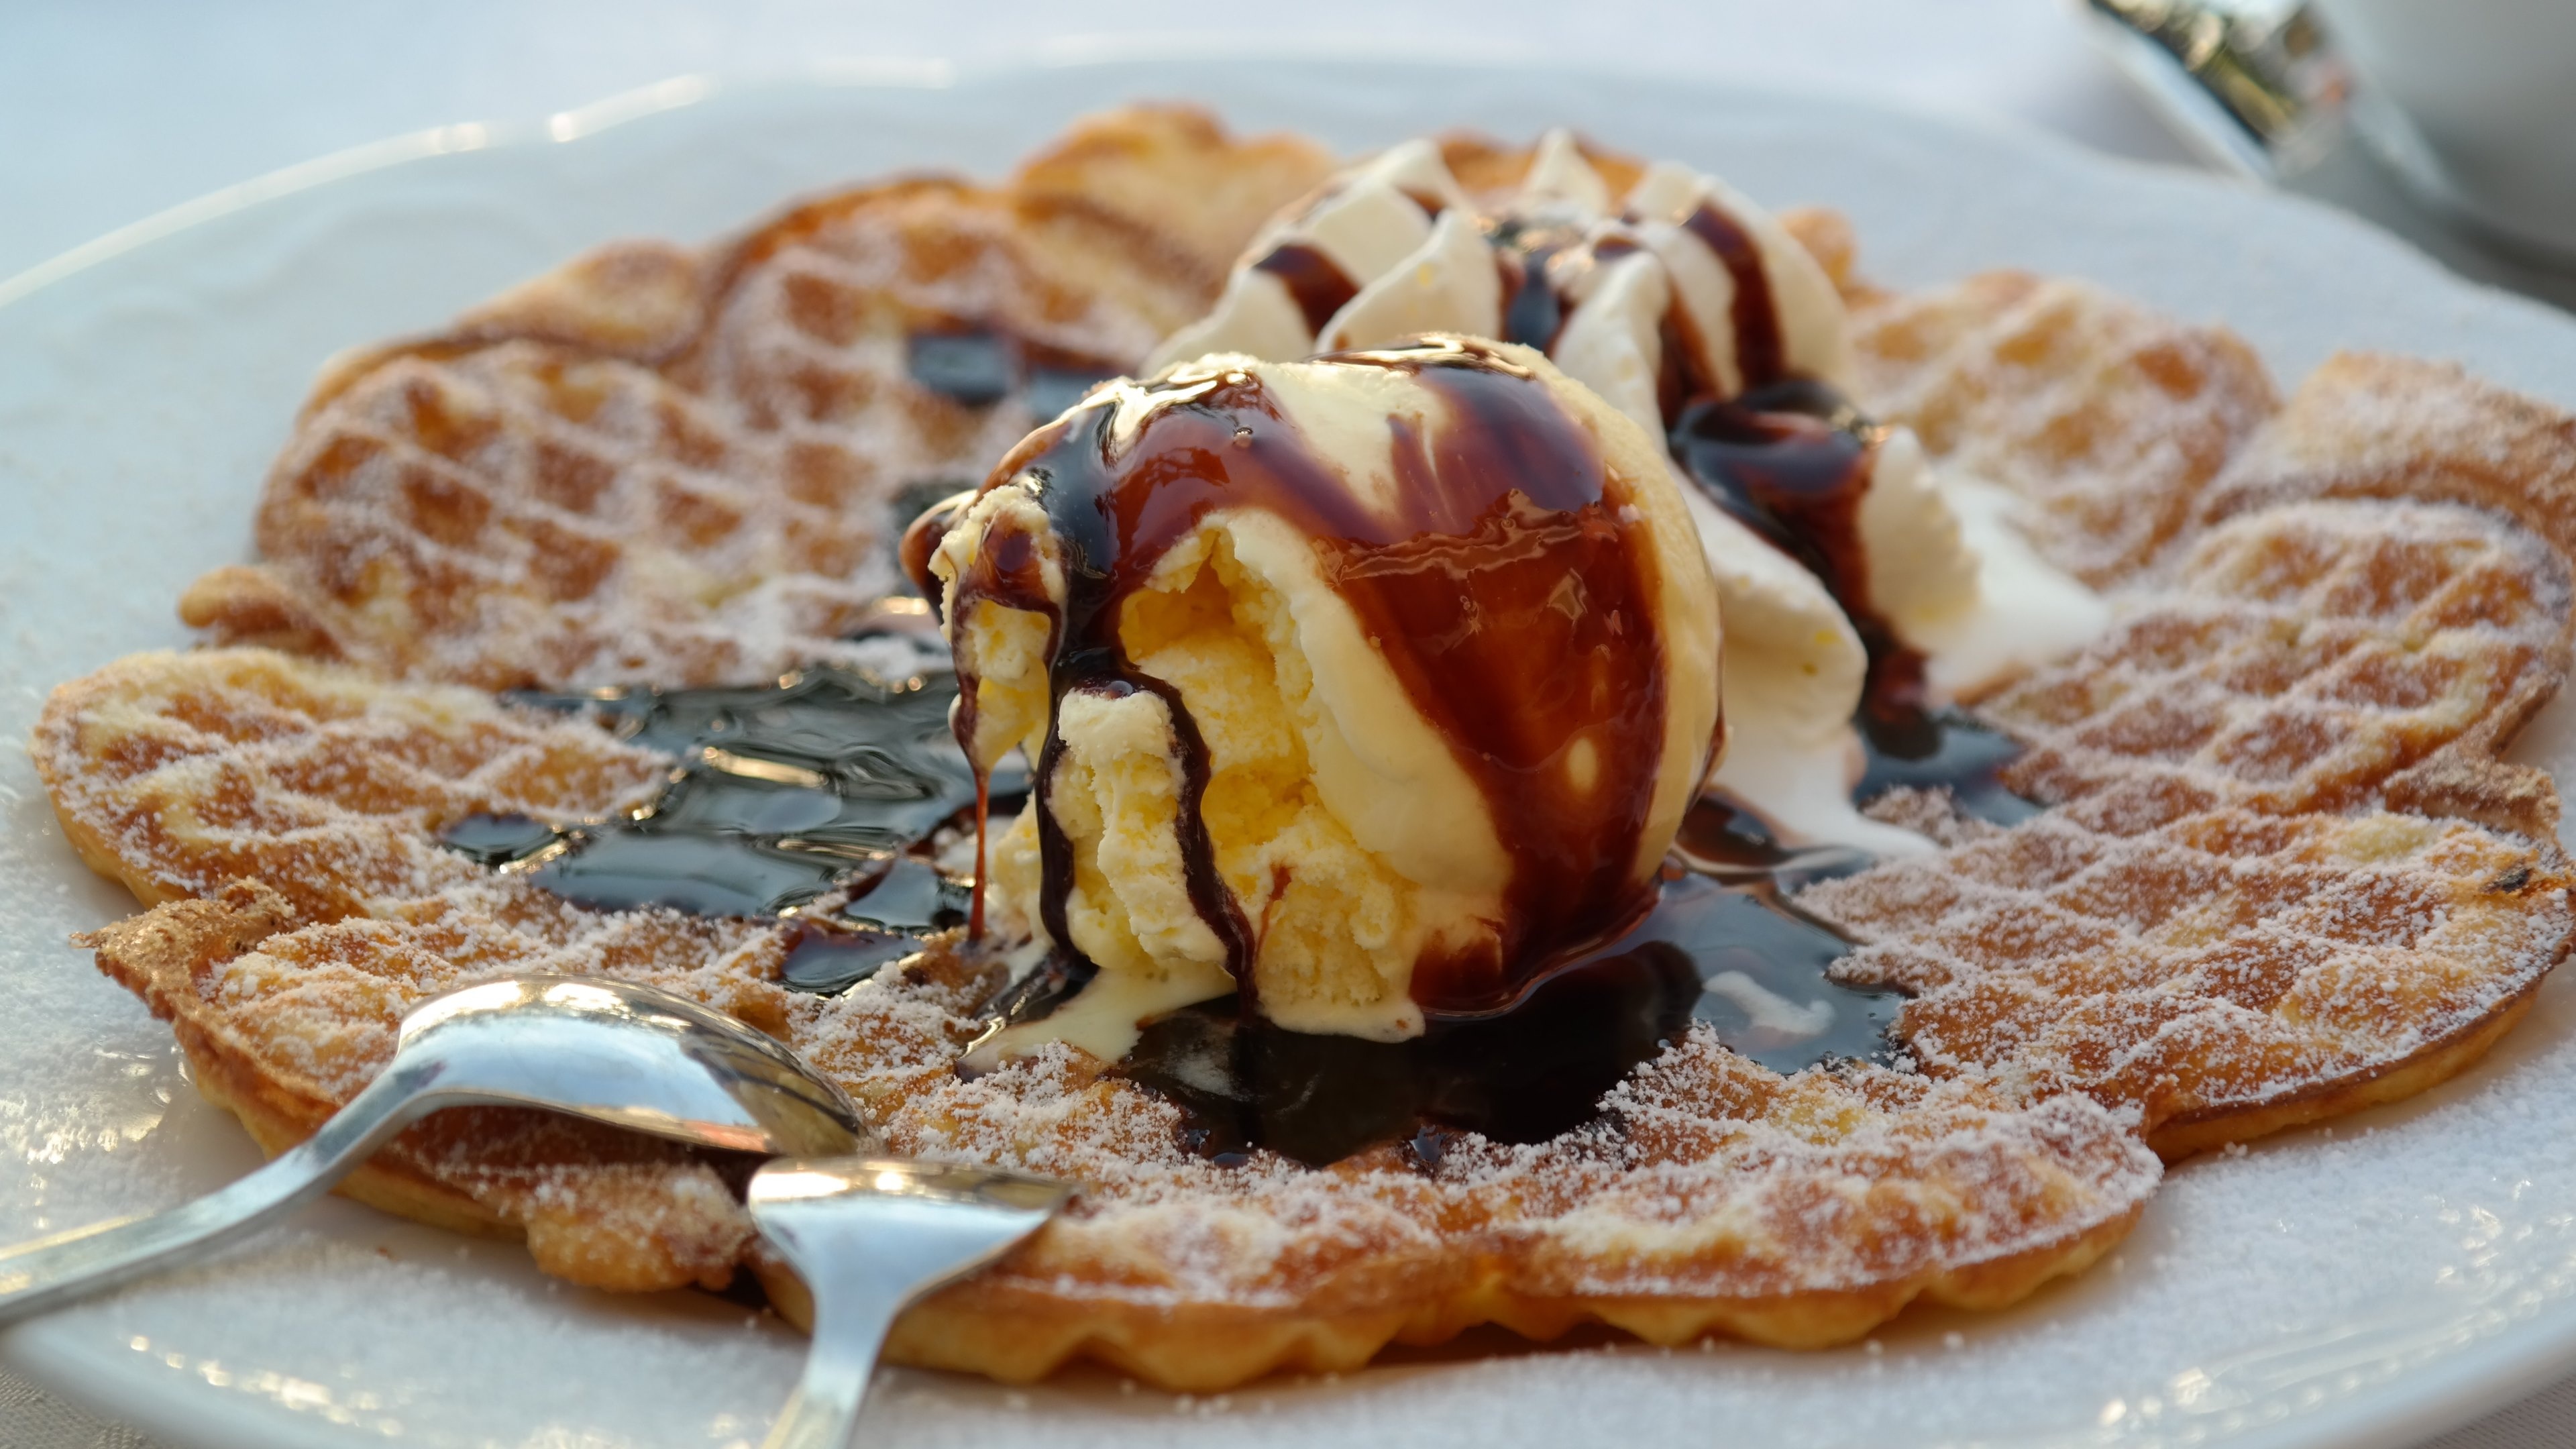 Waffle: A dish made from leavened batter or dough that is cooked between two plates. 3840x2160 4K Wallpaper.